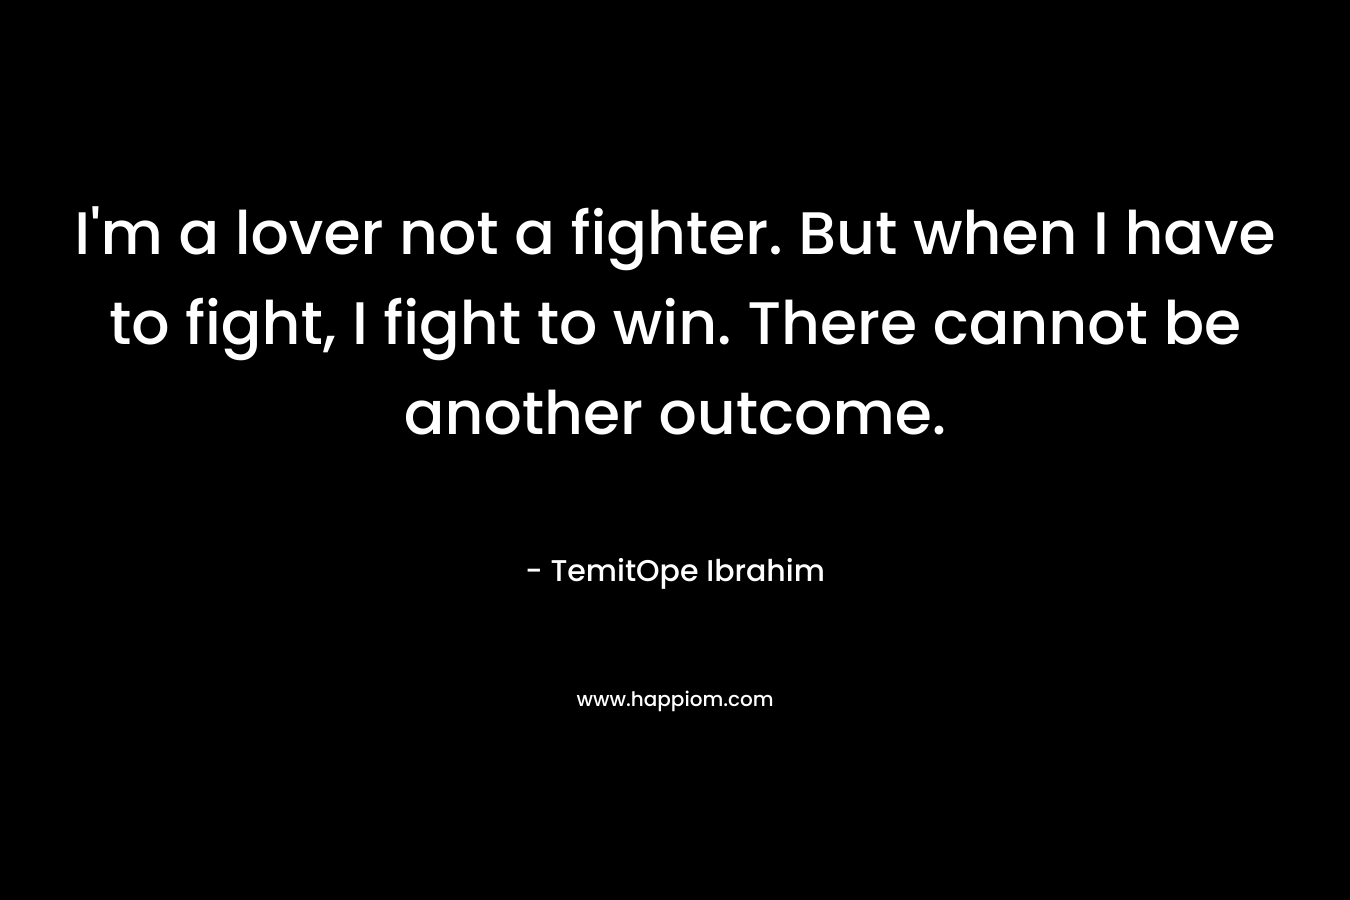 I'm a lover not a fighter. But when I have to fight, I fight to win. There cannot be another outcome.